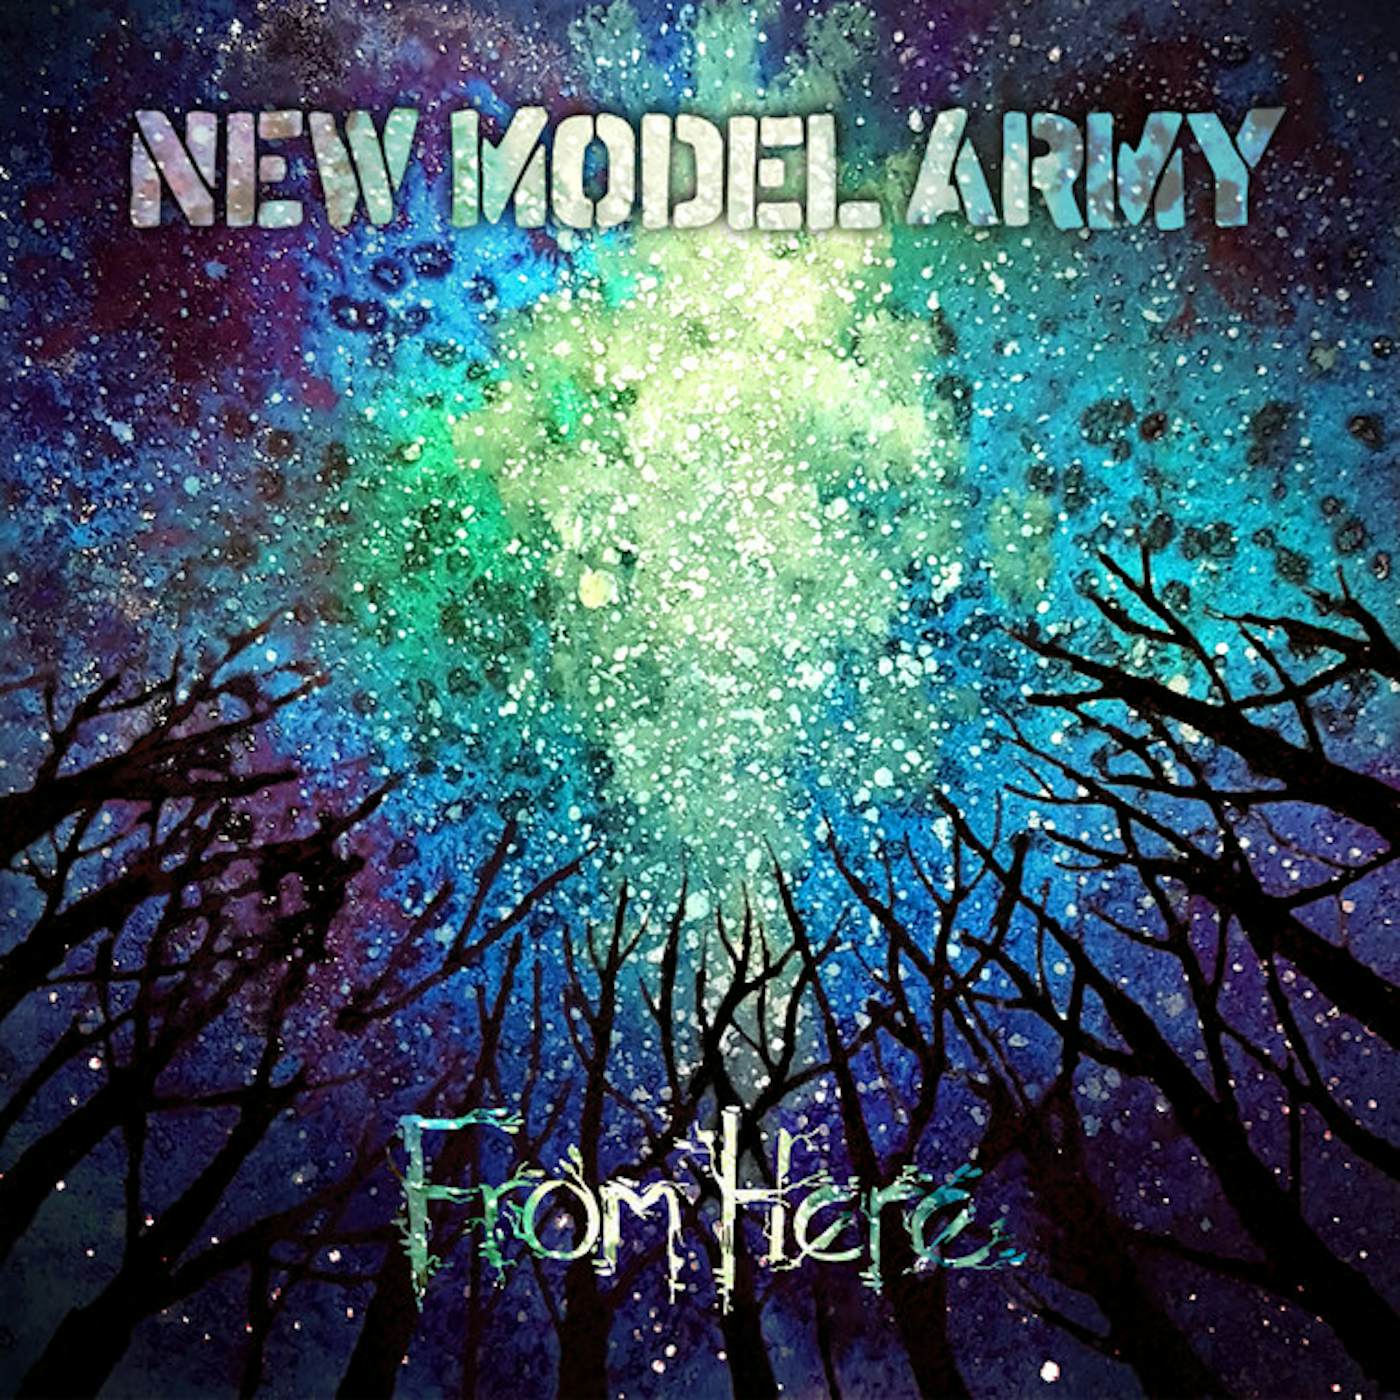 New Model Army FROM HERE CD